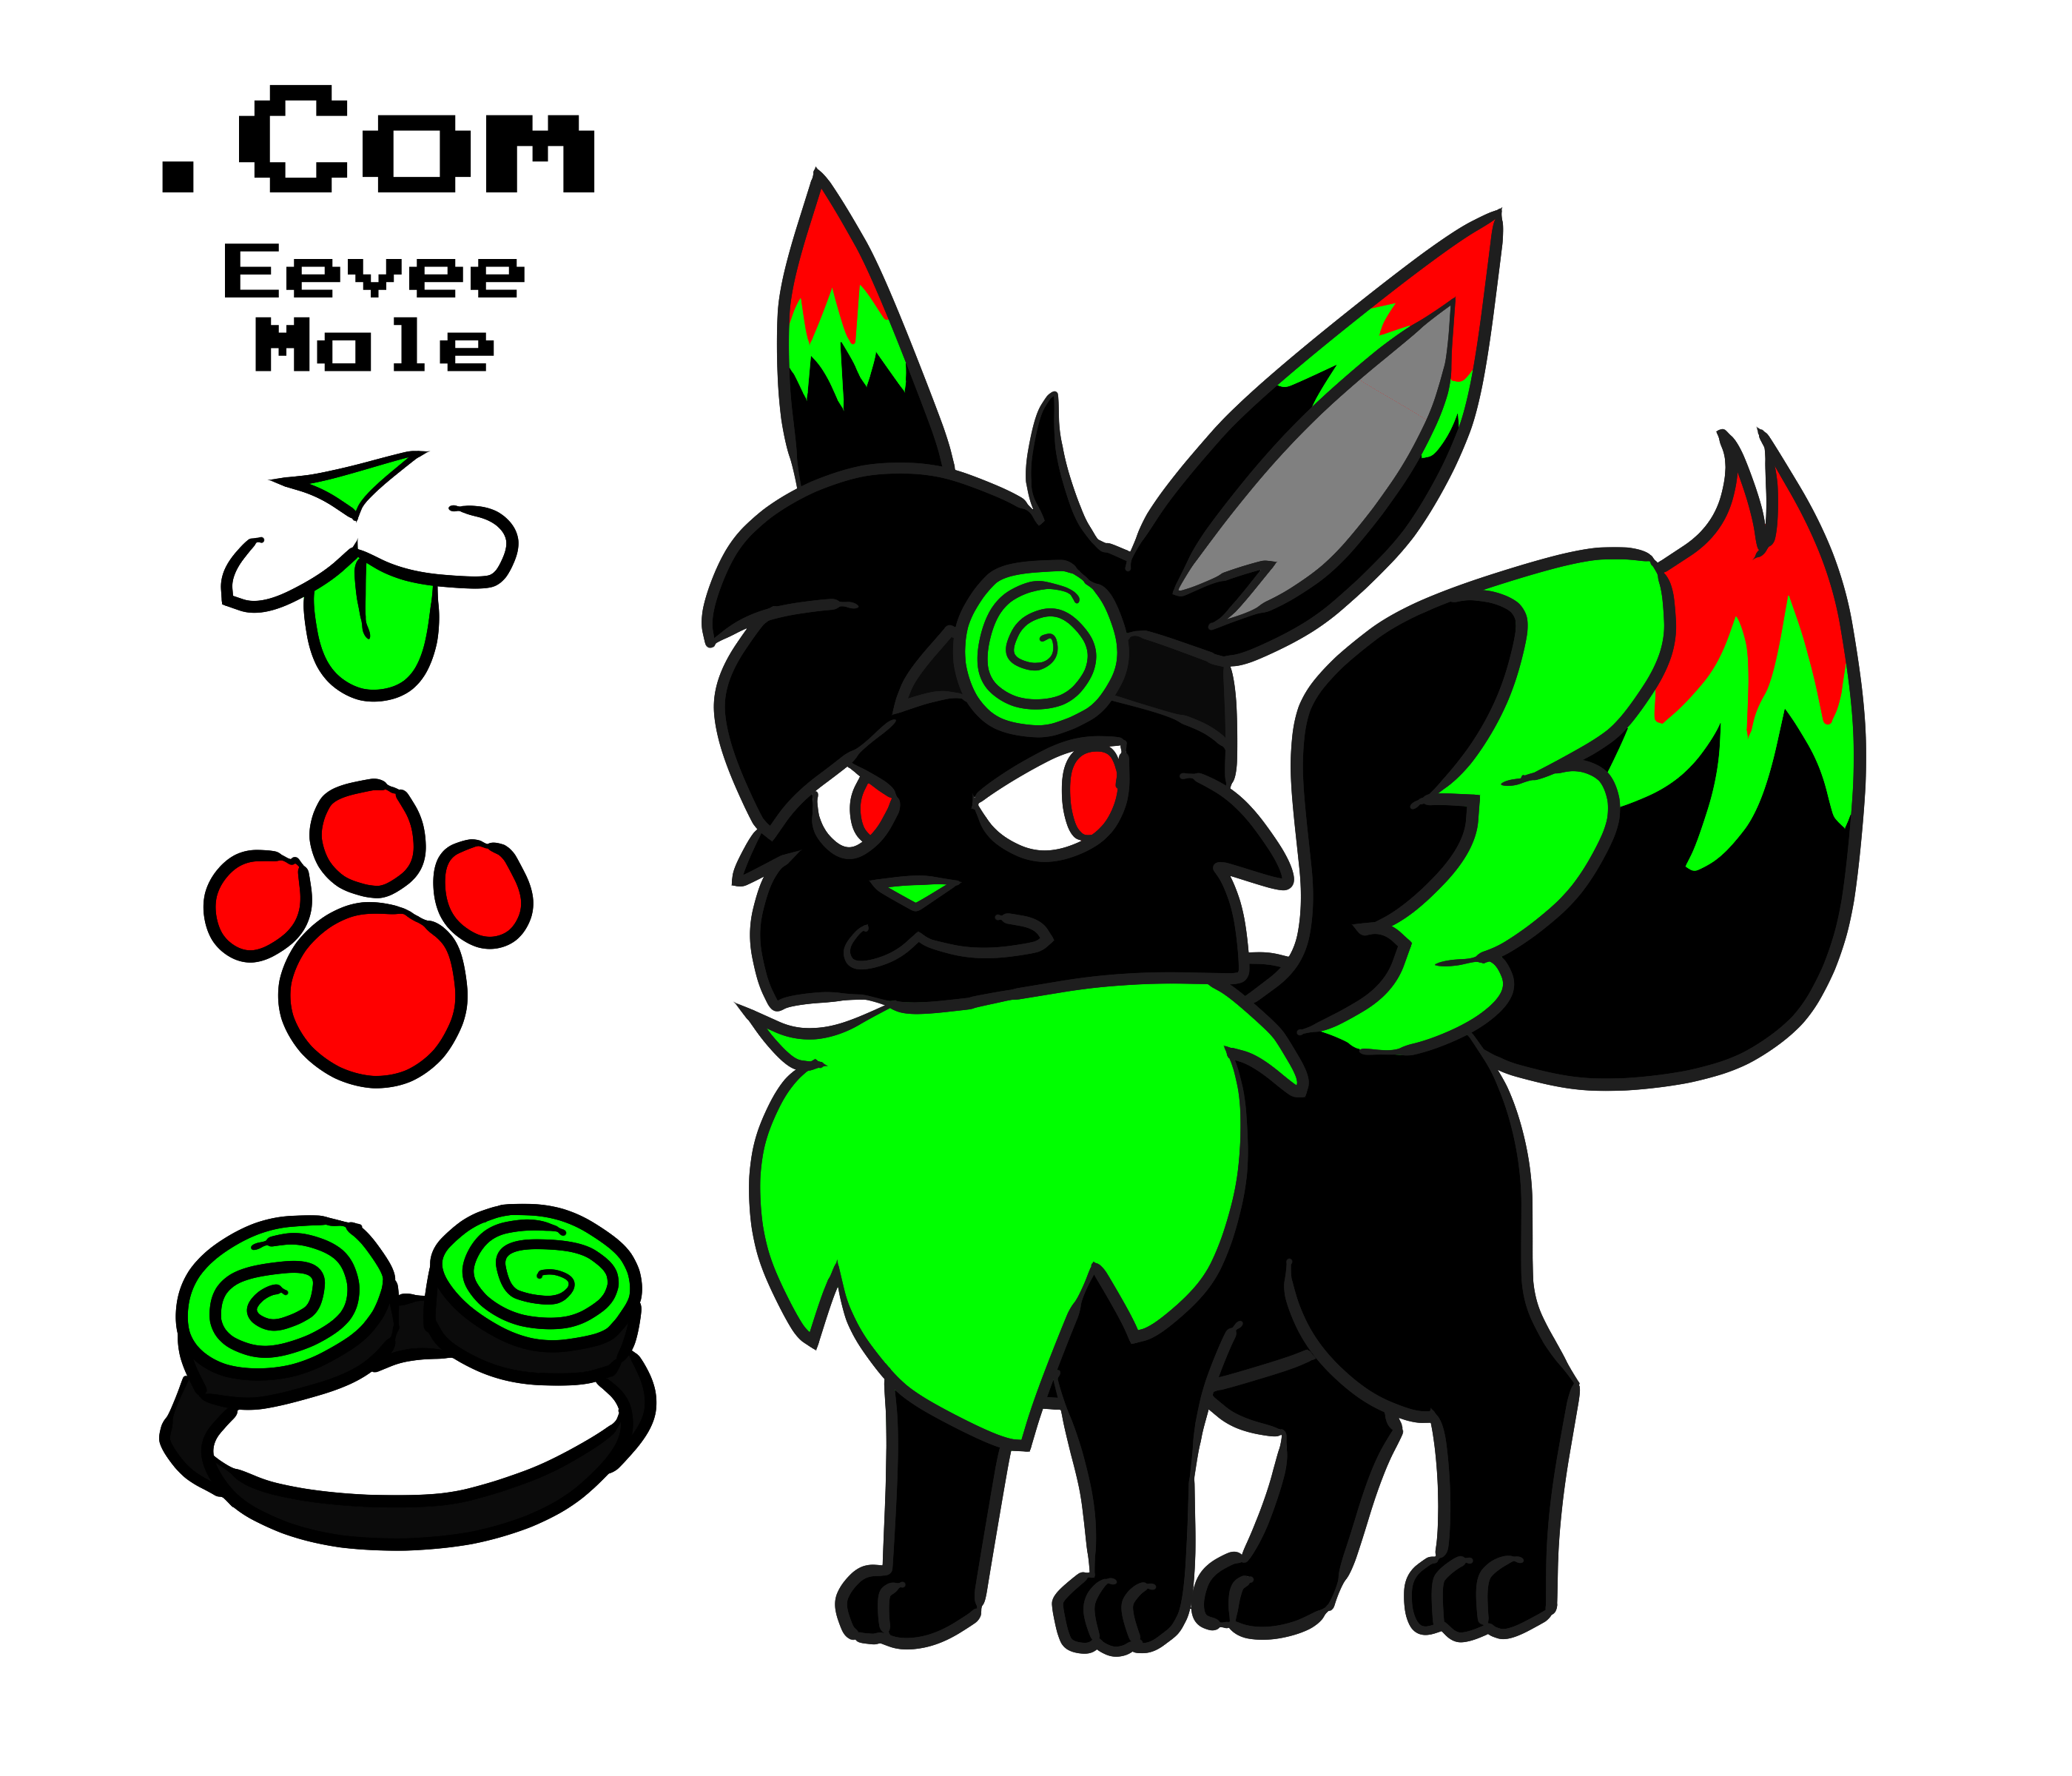 A drawing of an Eevee oc. His fur is predominantly black, with bright green and red accents. He has a set of wings with bright green tips and a pair of green swirly goggles. His information is listed as 'Dot Com, Eevee, male', followed by close-ups of his mouth, paw pads, and goggles.